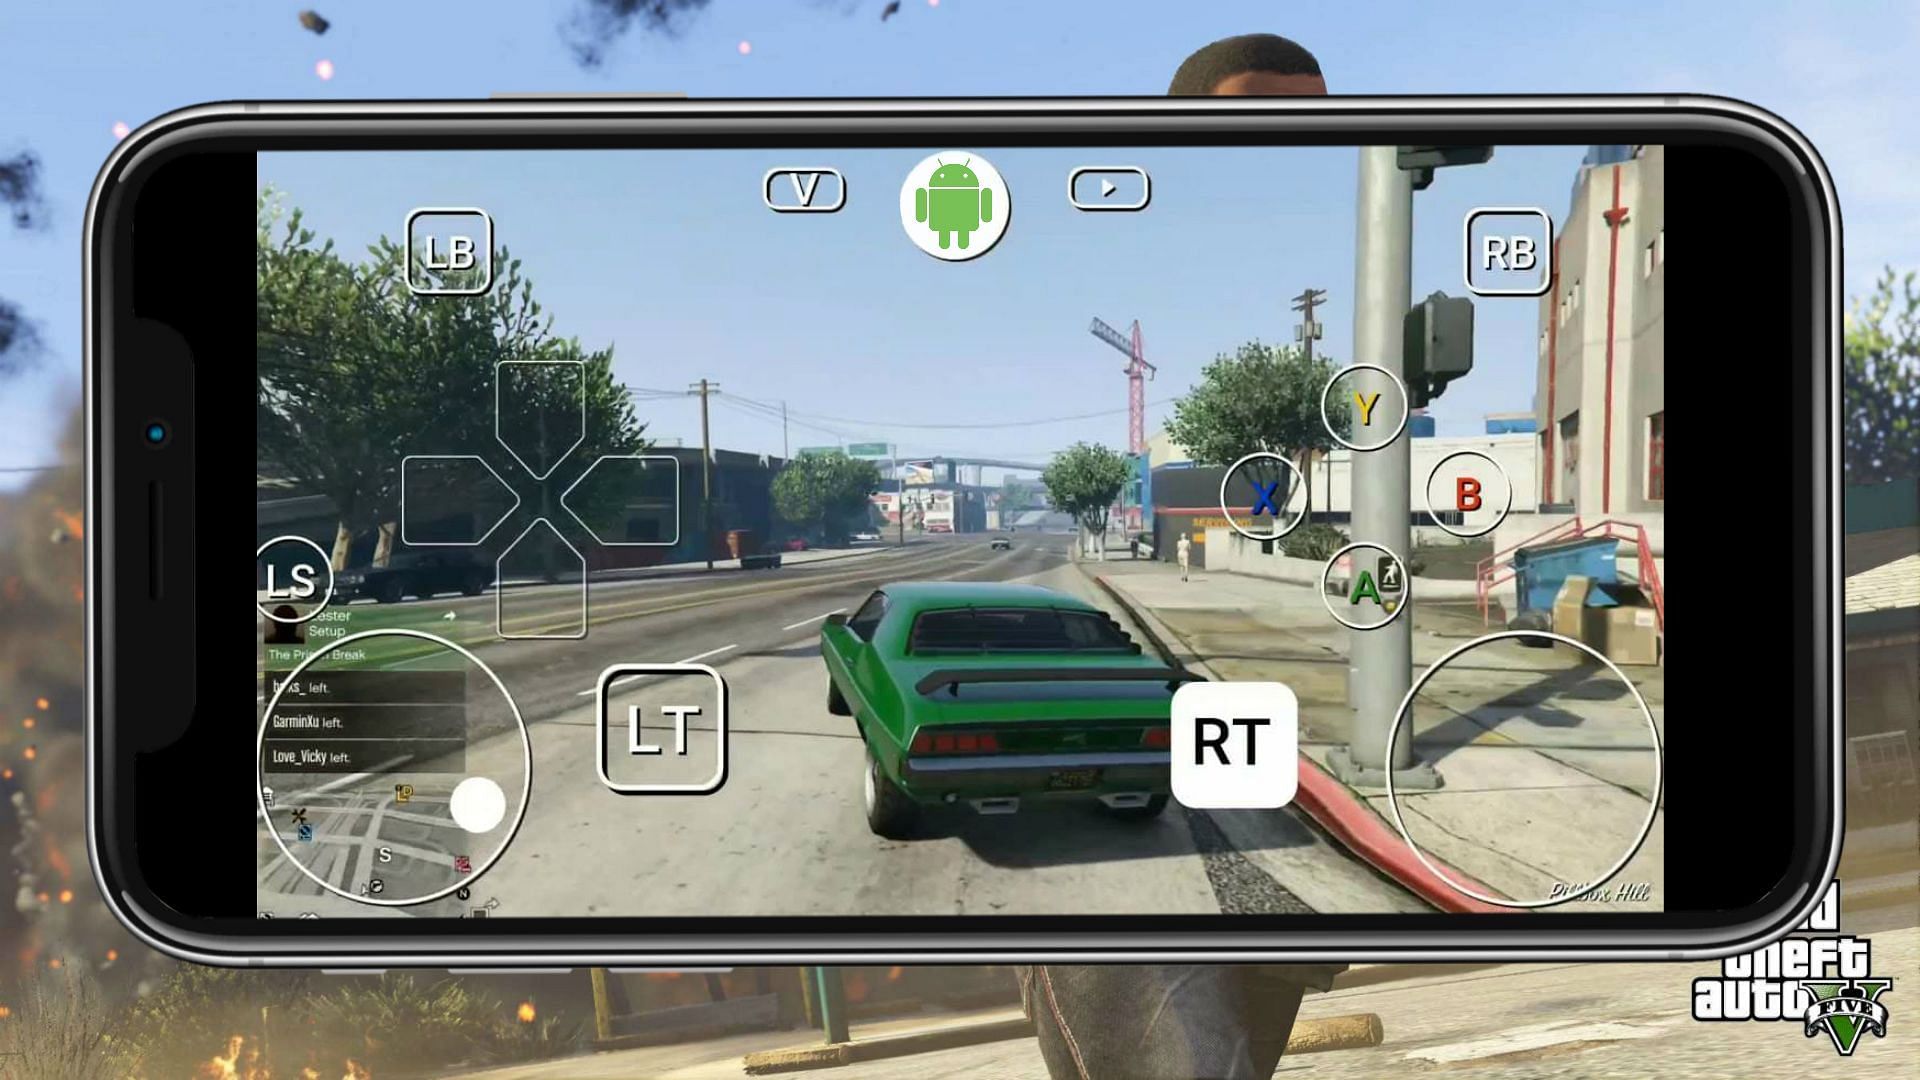 Is GTA 5 impossible to port to Android? (Image via Sportskeeda)